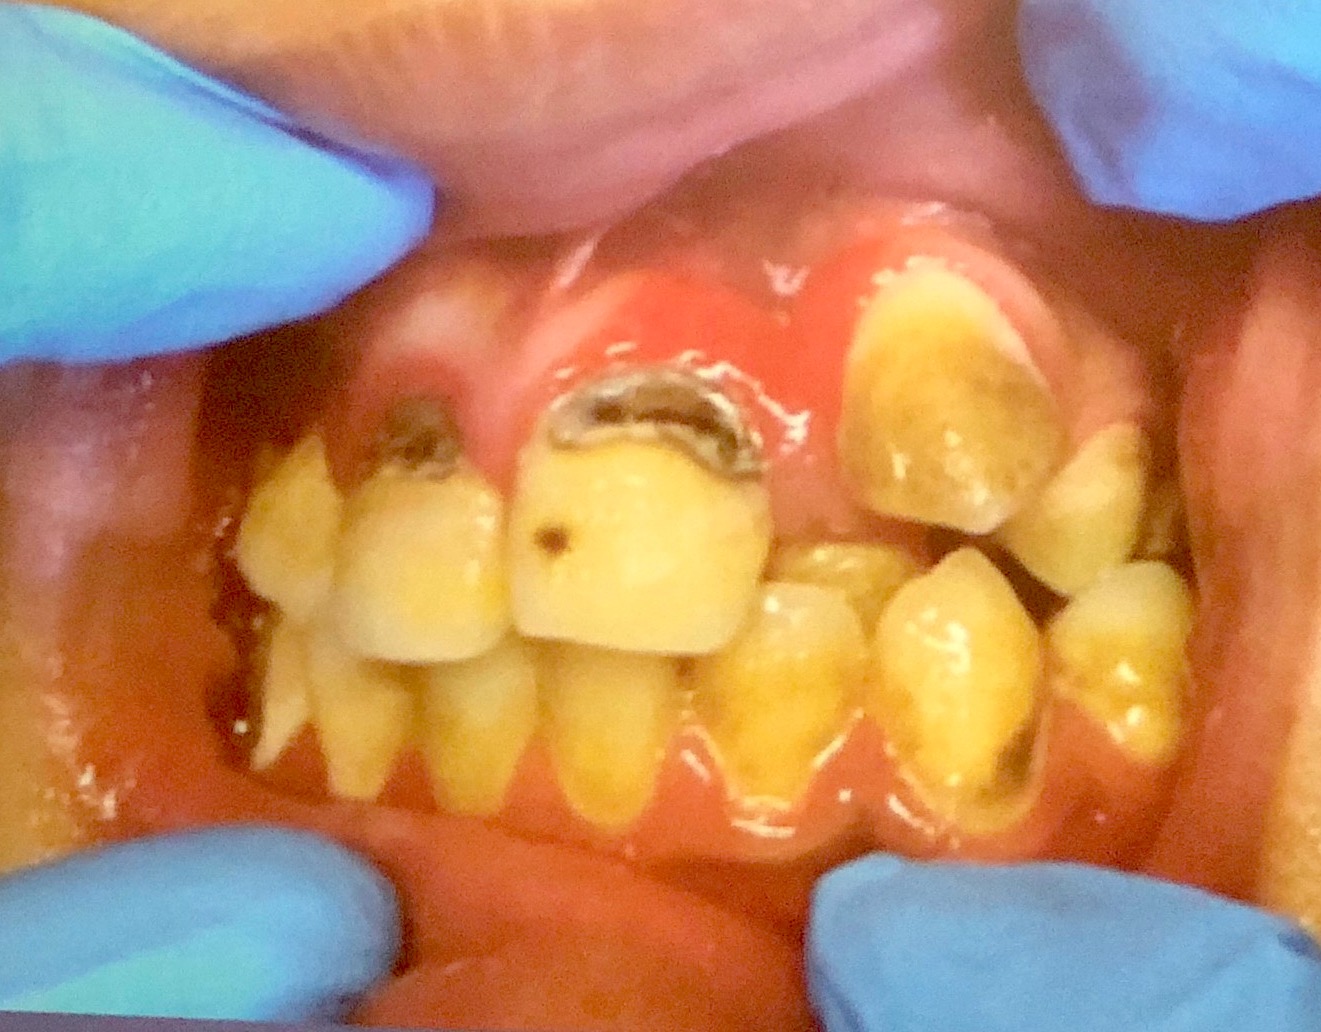 When dentists see crooked and rotten teeth like these in Nunavut, there is not much they can do except try to repair them or pull them. Orthodontists often refuse to put on braces to correct the teeth due to their poor condition. (PHOTO COURTESY OF MARTA DEMUTH)